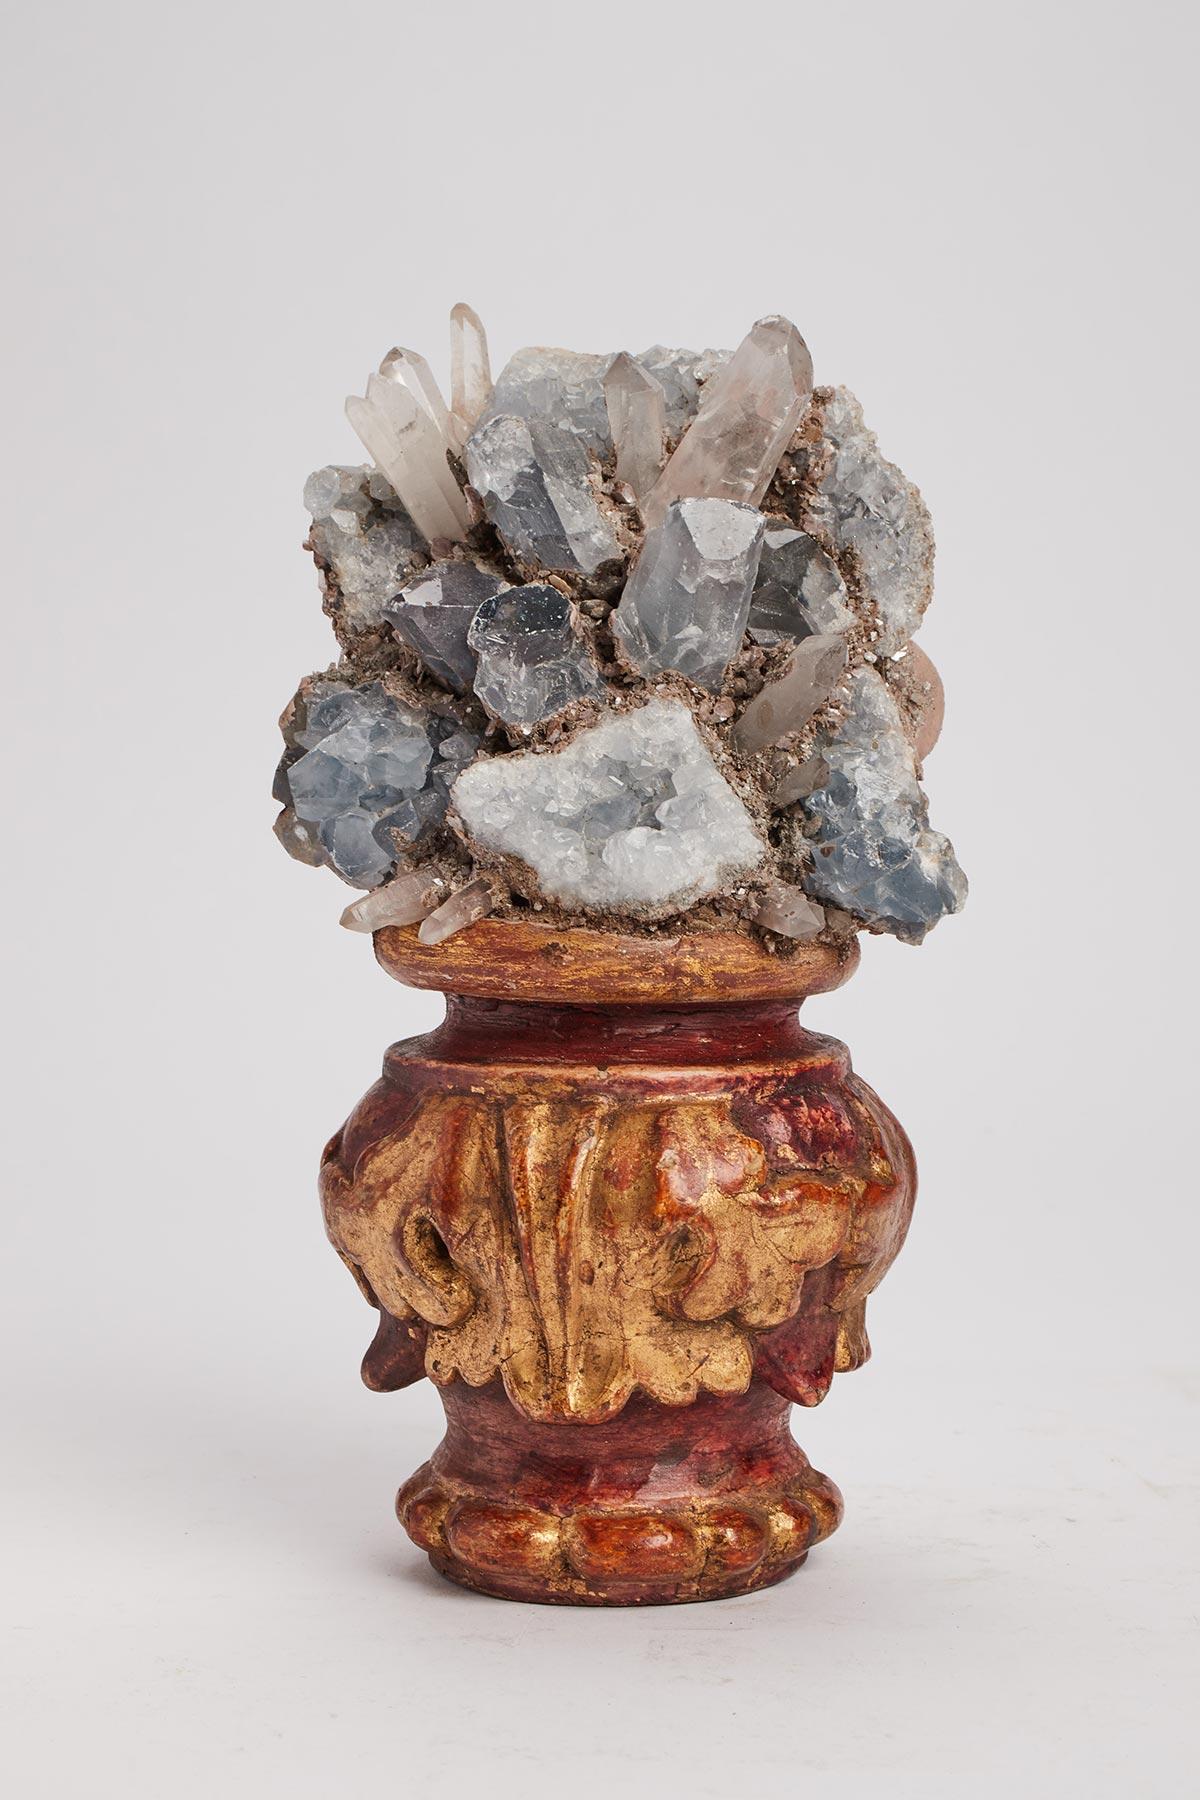 A Naturalia mineral specimen. Celestite or celestine crystals mounted over a carved wooden base gold gilt on a shape of a vase. Italy last part of 19th century.